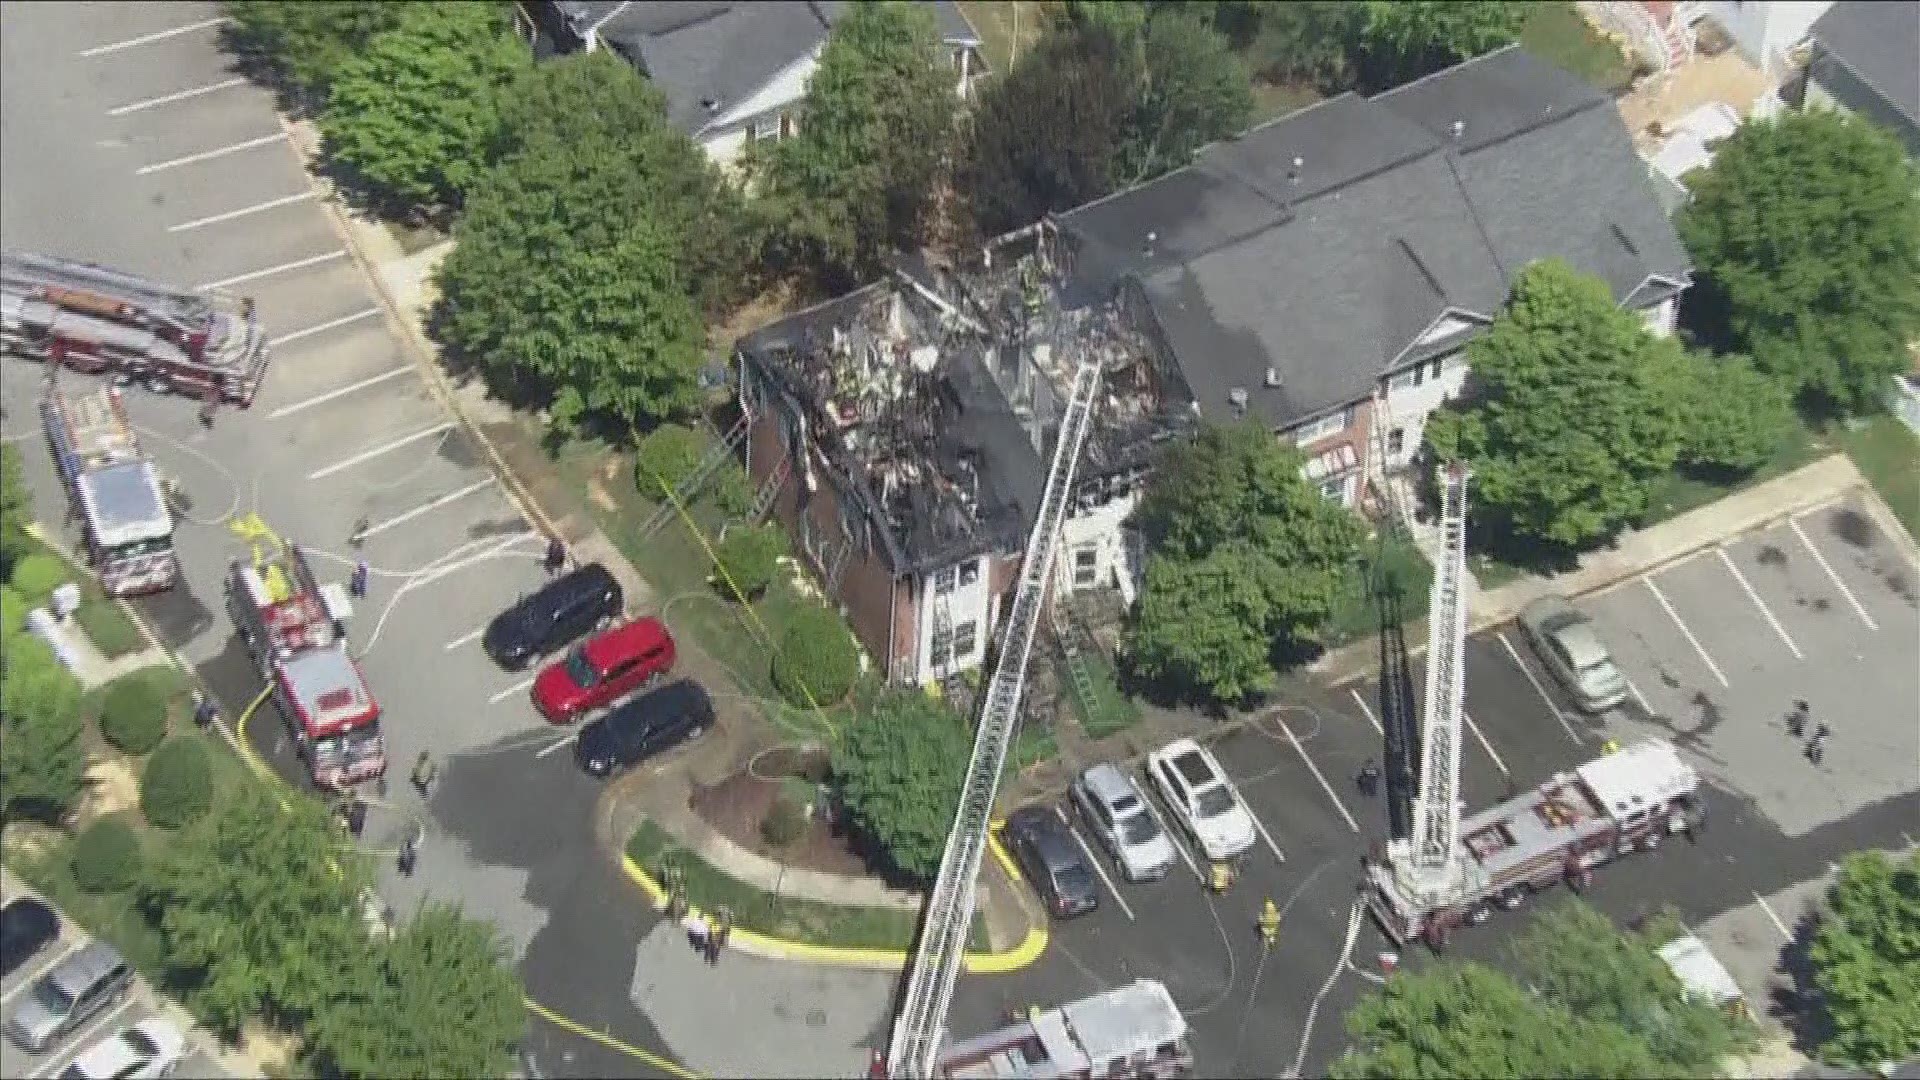 10 people are now without a home after a 2 alarm fire collapses their roof